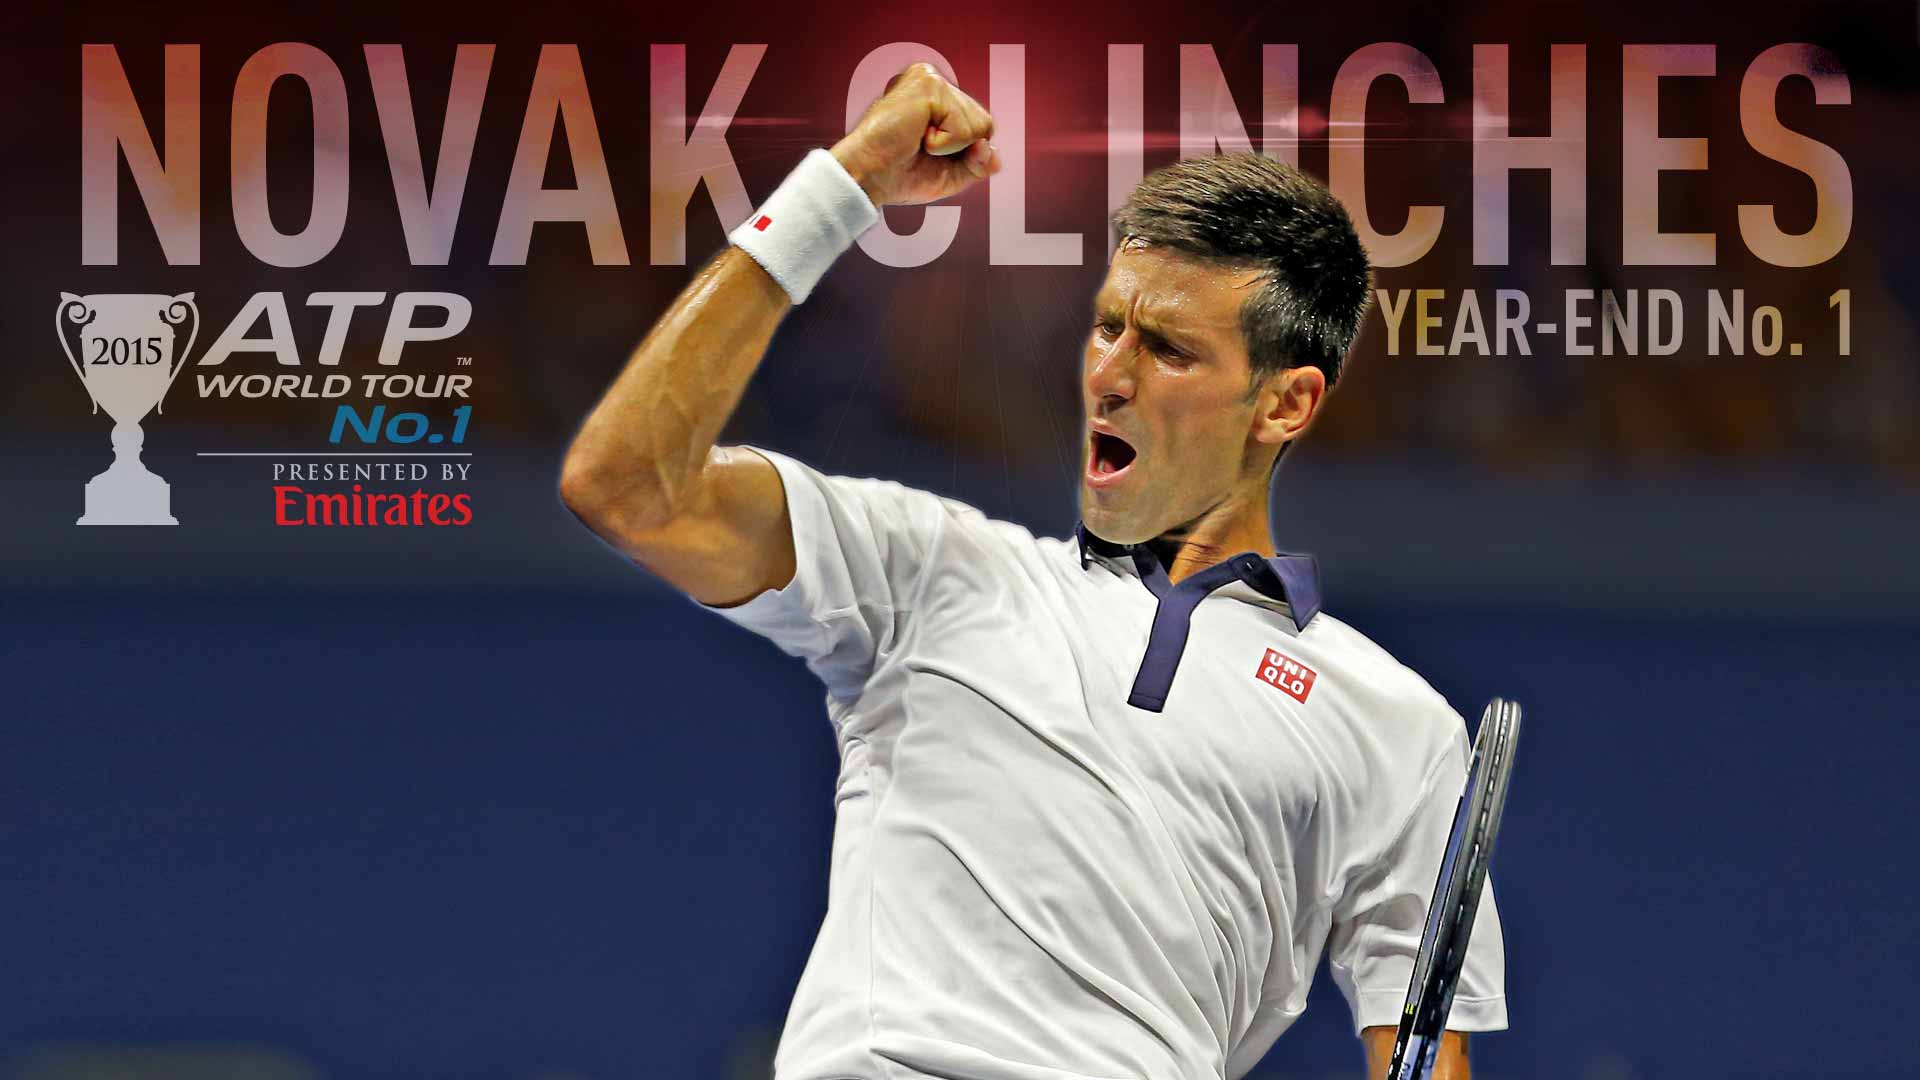 Djokovic Clinches Year-End No